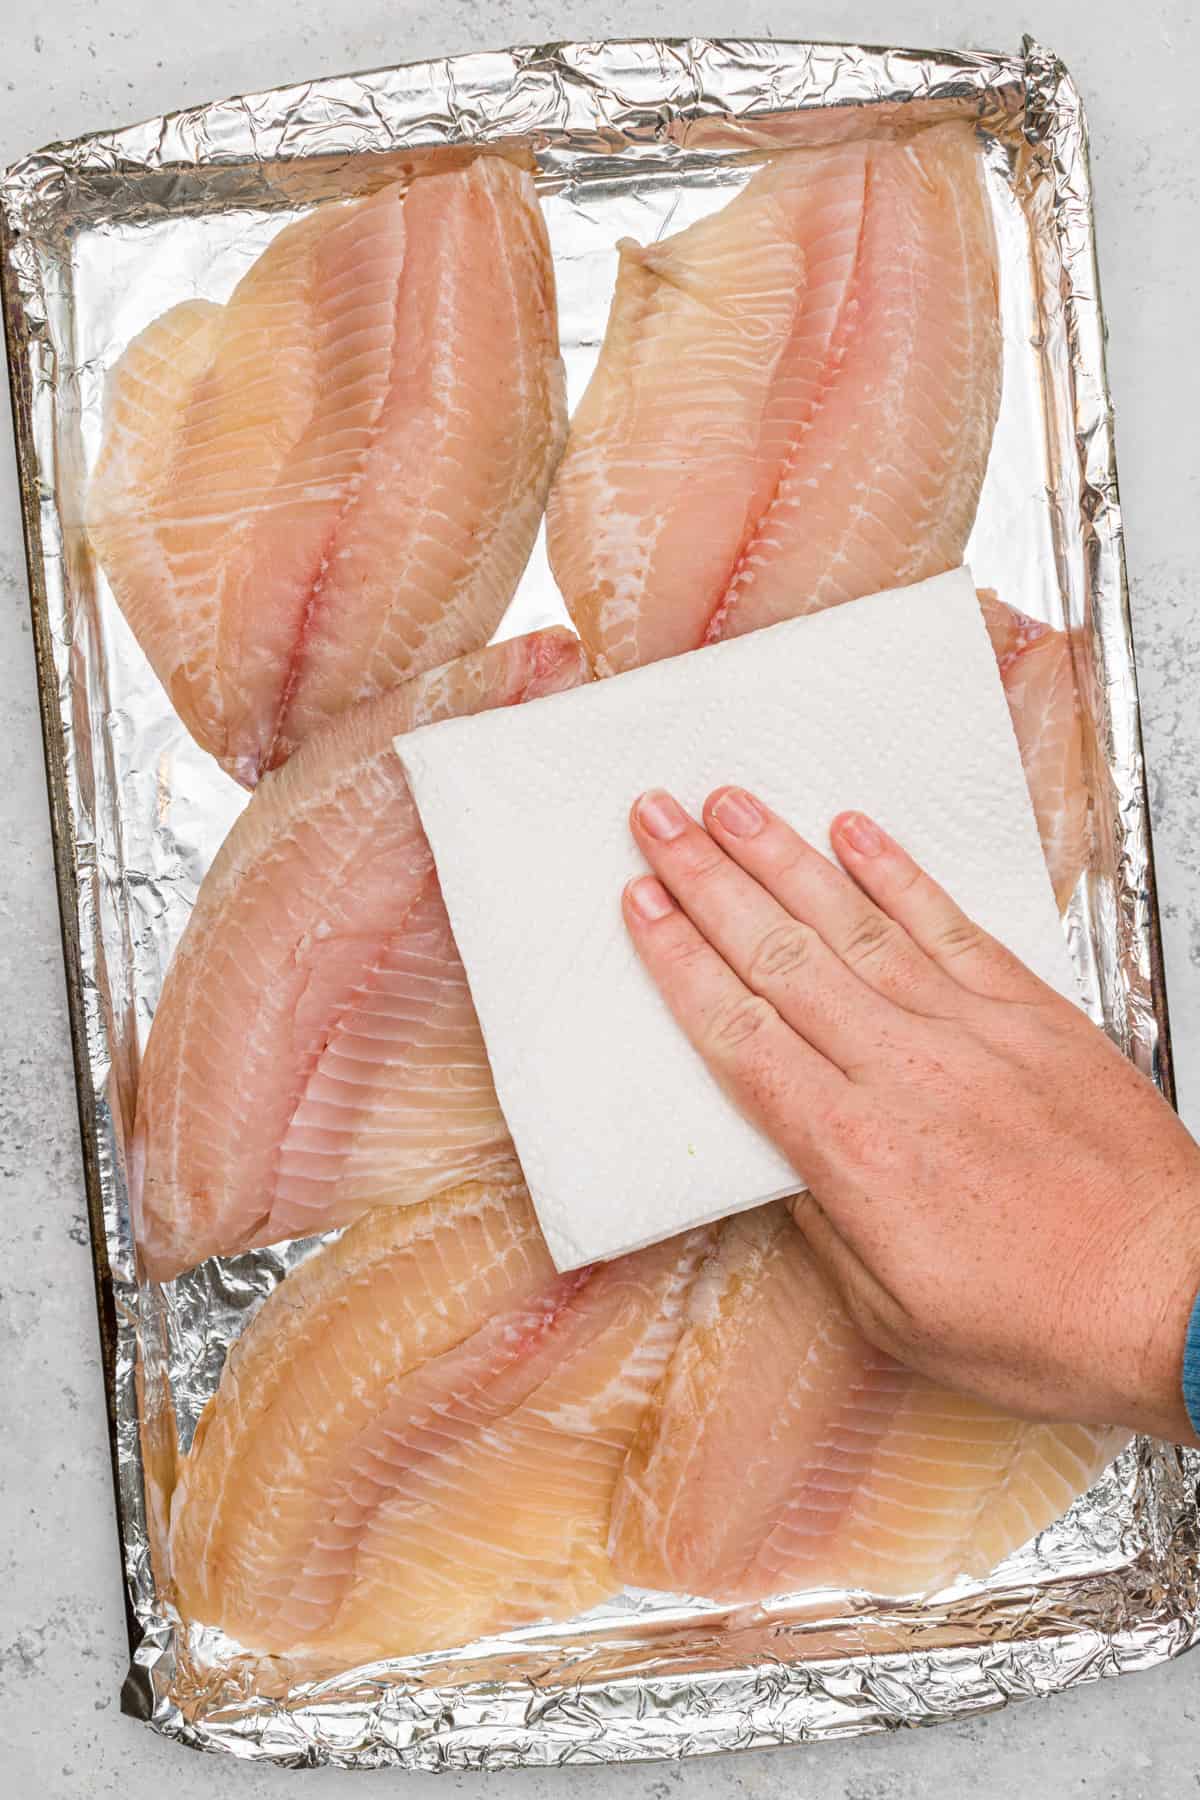 Raw tilapia fillets on baking sheet lined with foil. A hand is using a paper towel to pat the fillets dry.